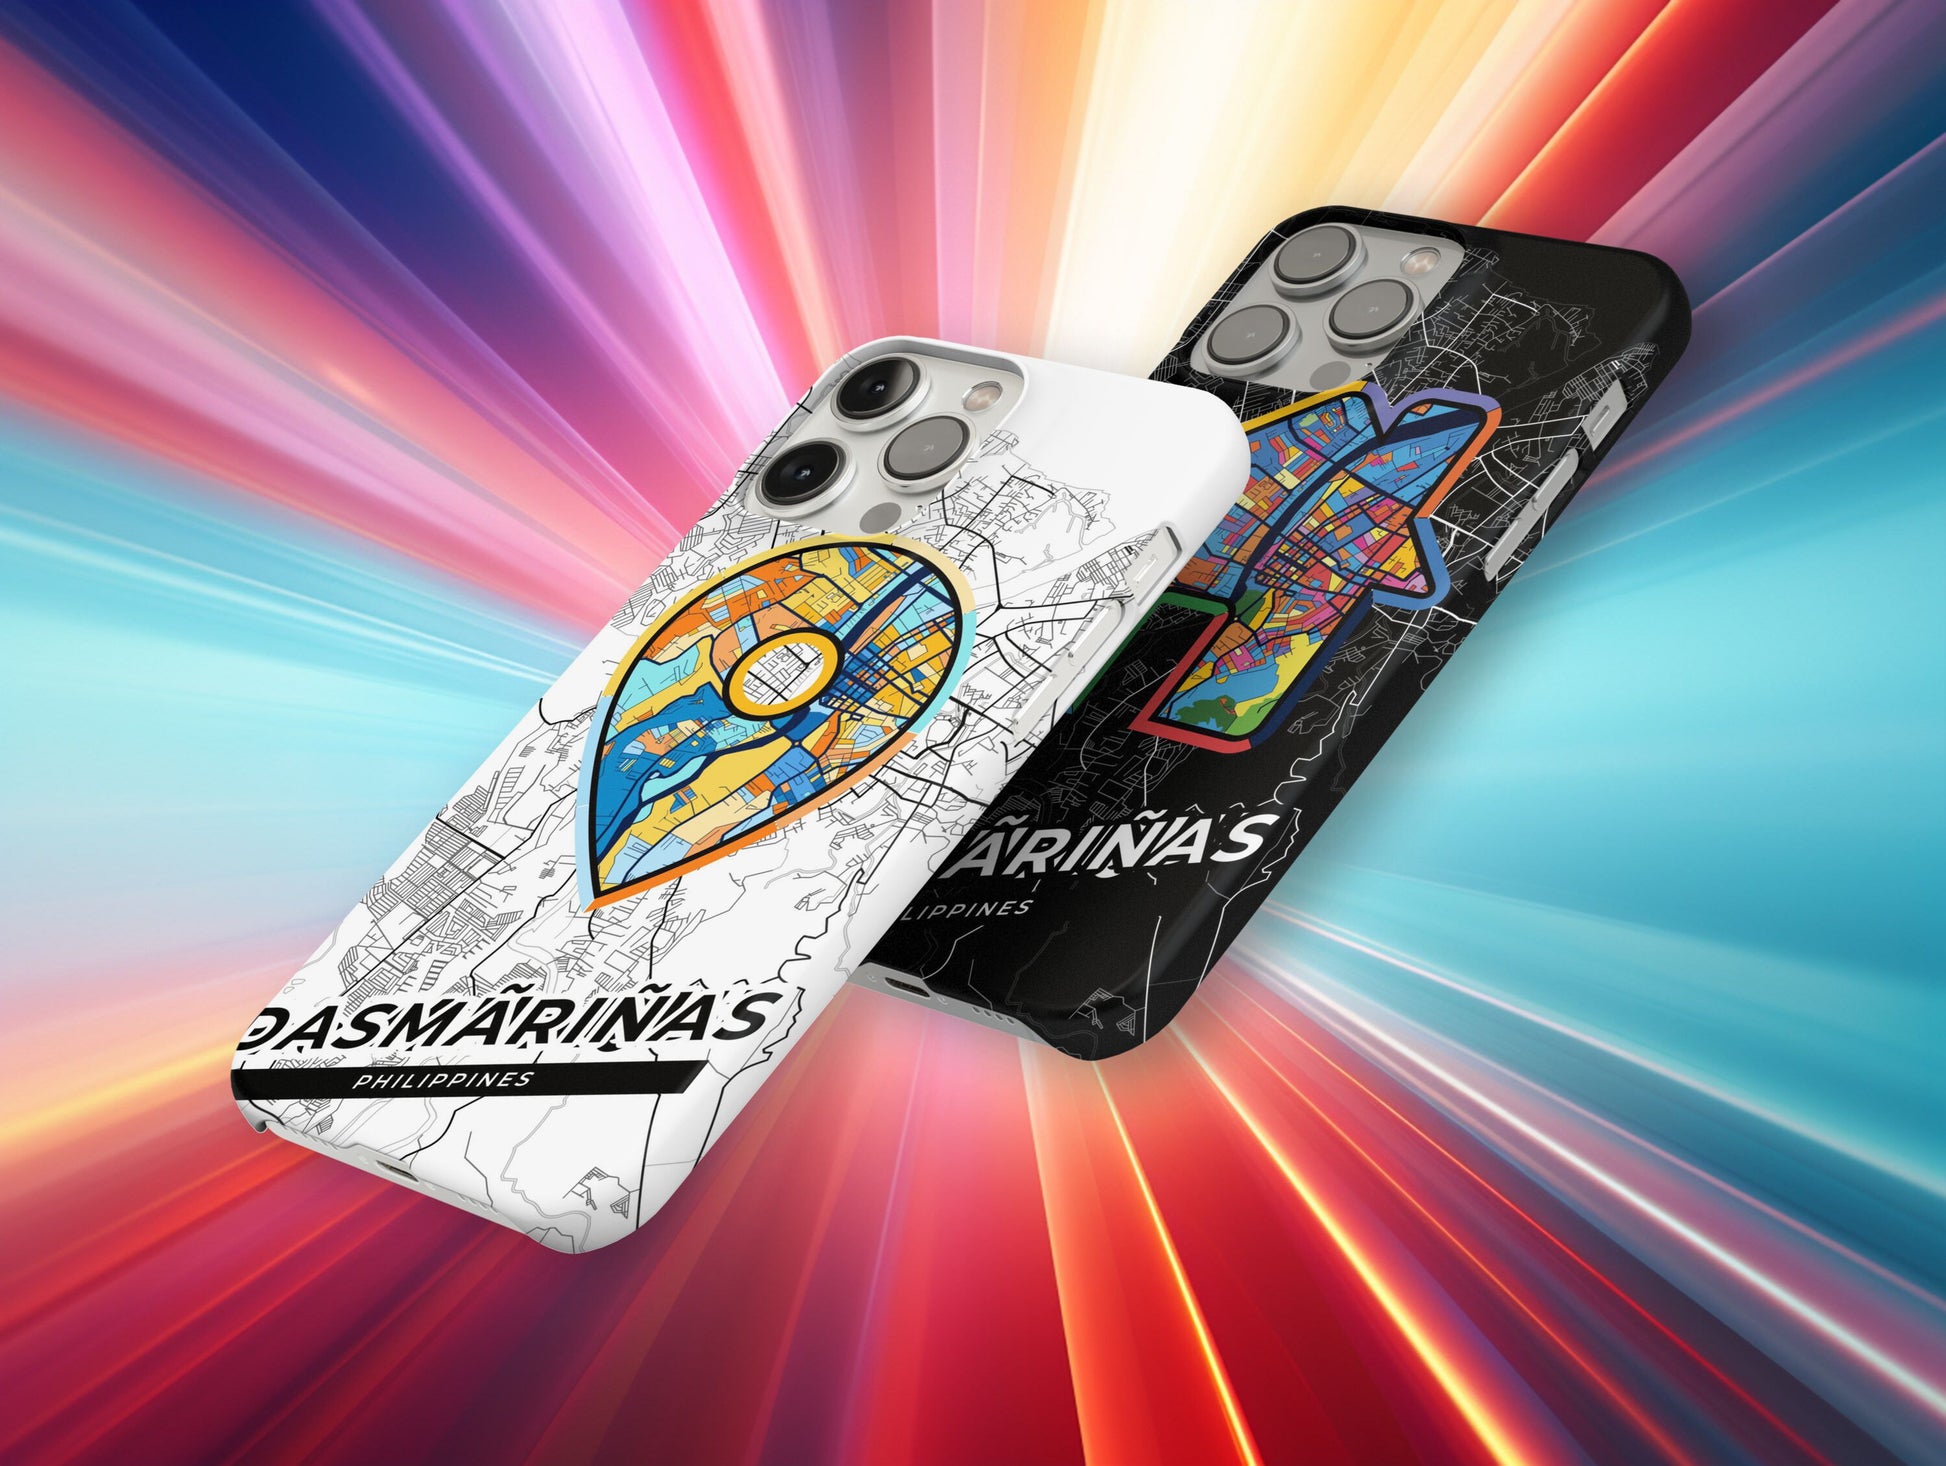 Dasmariñas Philippines slim phone case with colorful icon. Birthday, wedding or housewarming gift. Couple match cases.